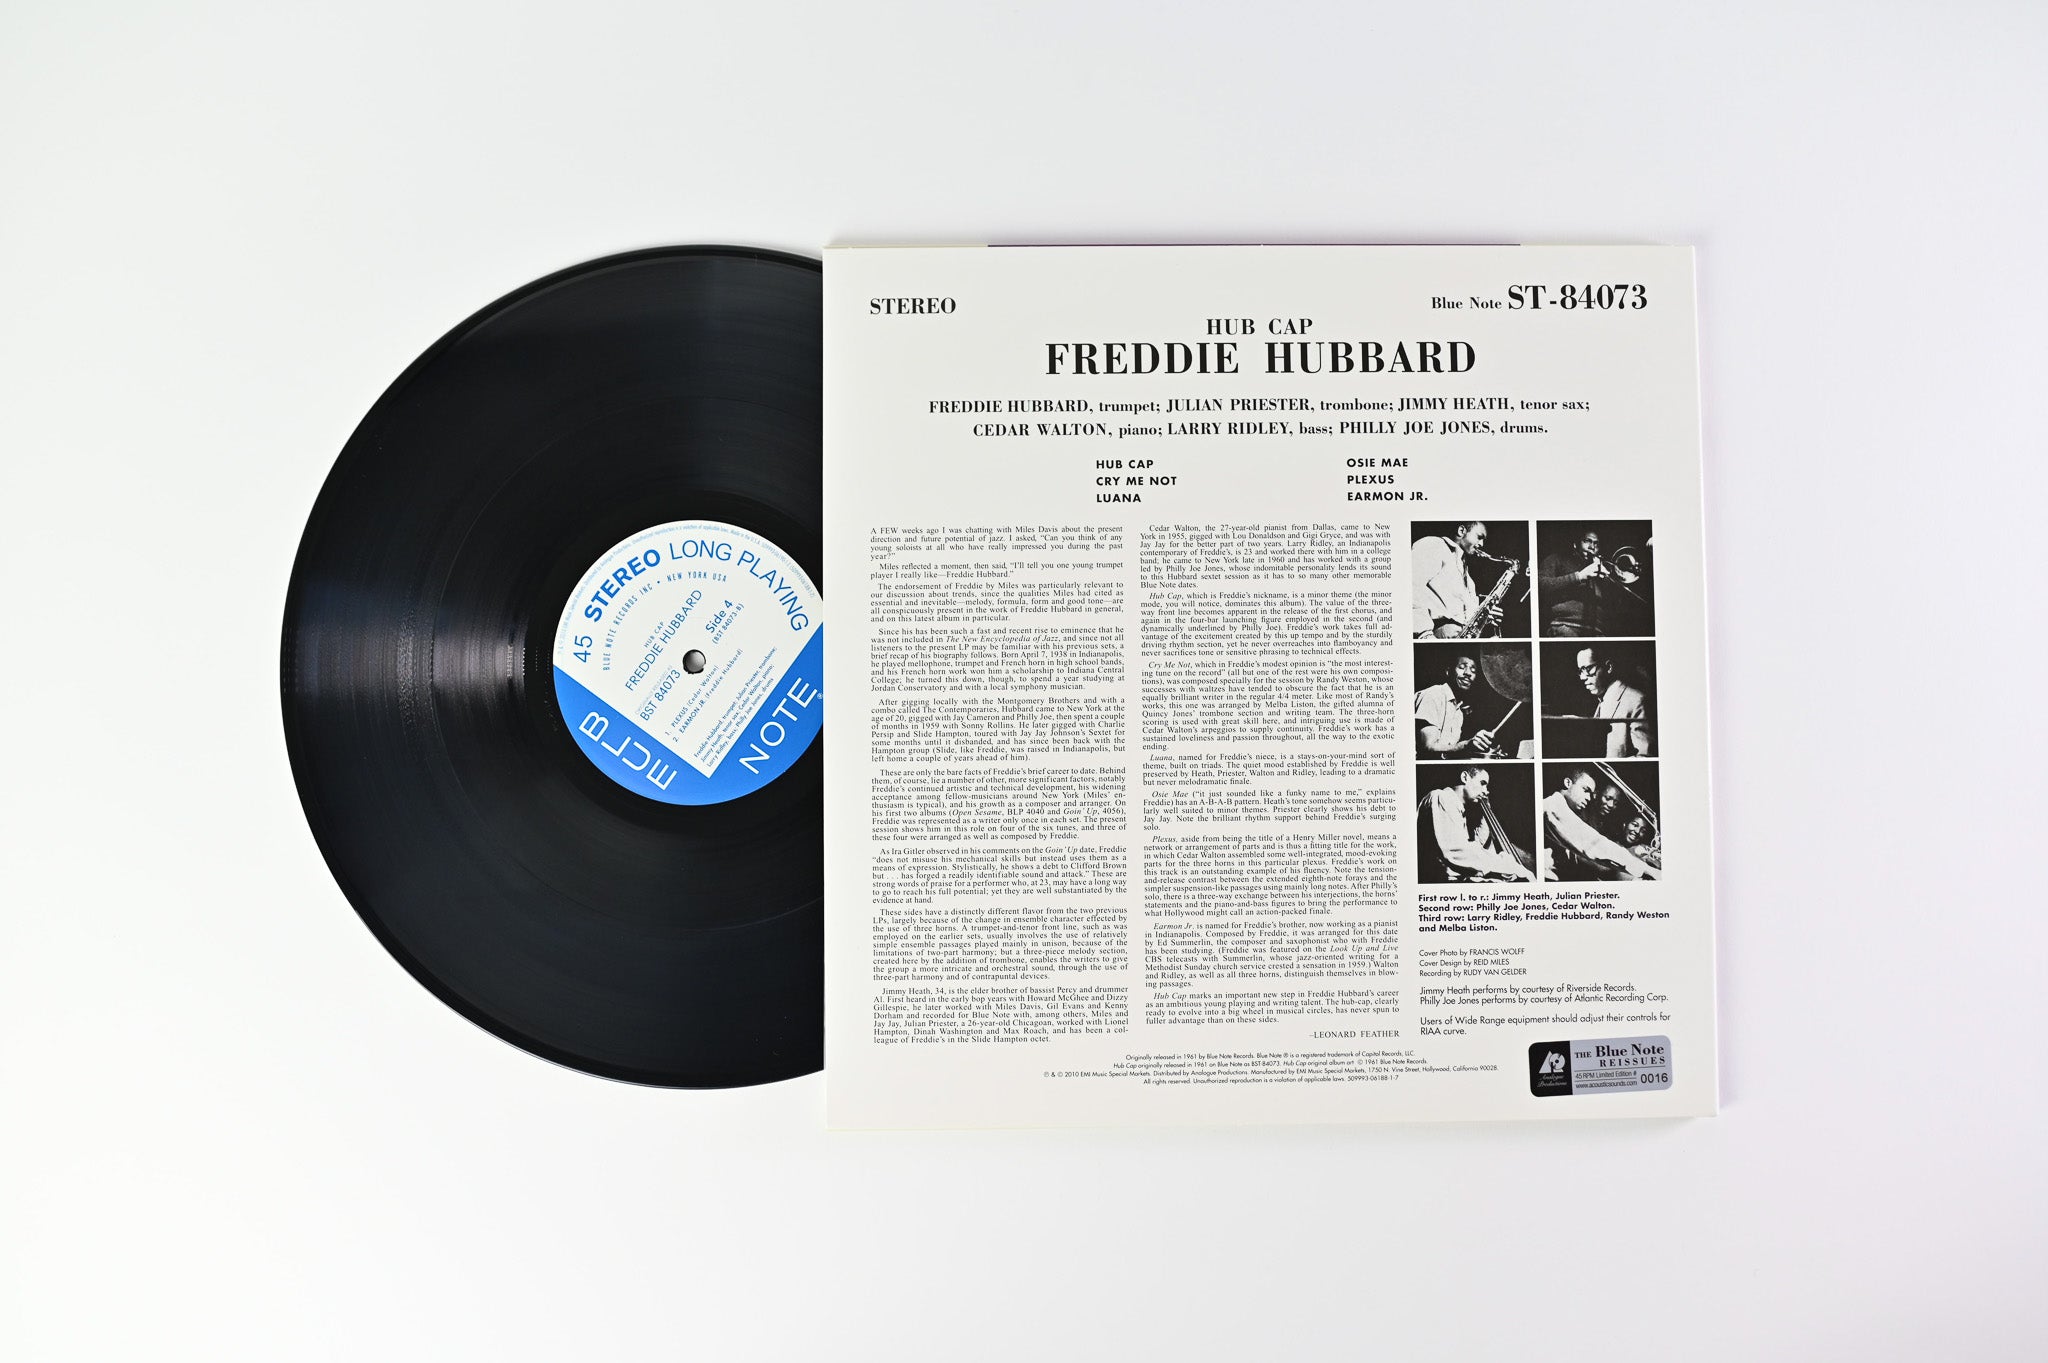 Freddie Hubbard - Hub Cap on Blue Note Analogue Productions Ltd 45 RPM Numbered Reissue